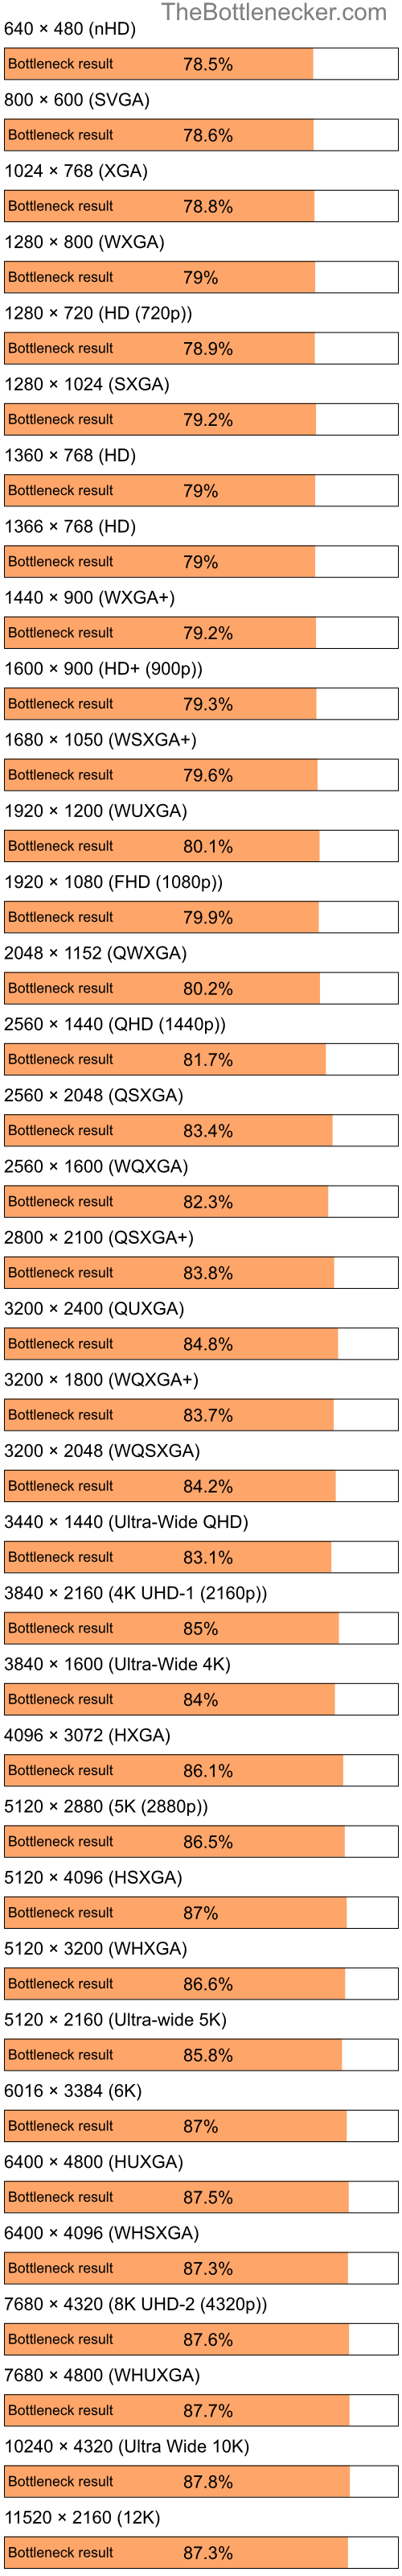 Bottleneck results by resolution for Intel Celeron and AMD Mobility Radeon X1350 in Graphic Card Intense Tasks